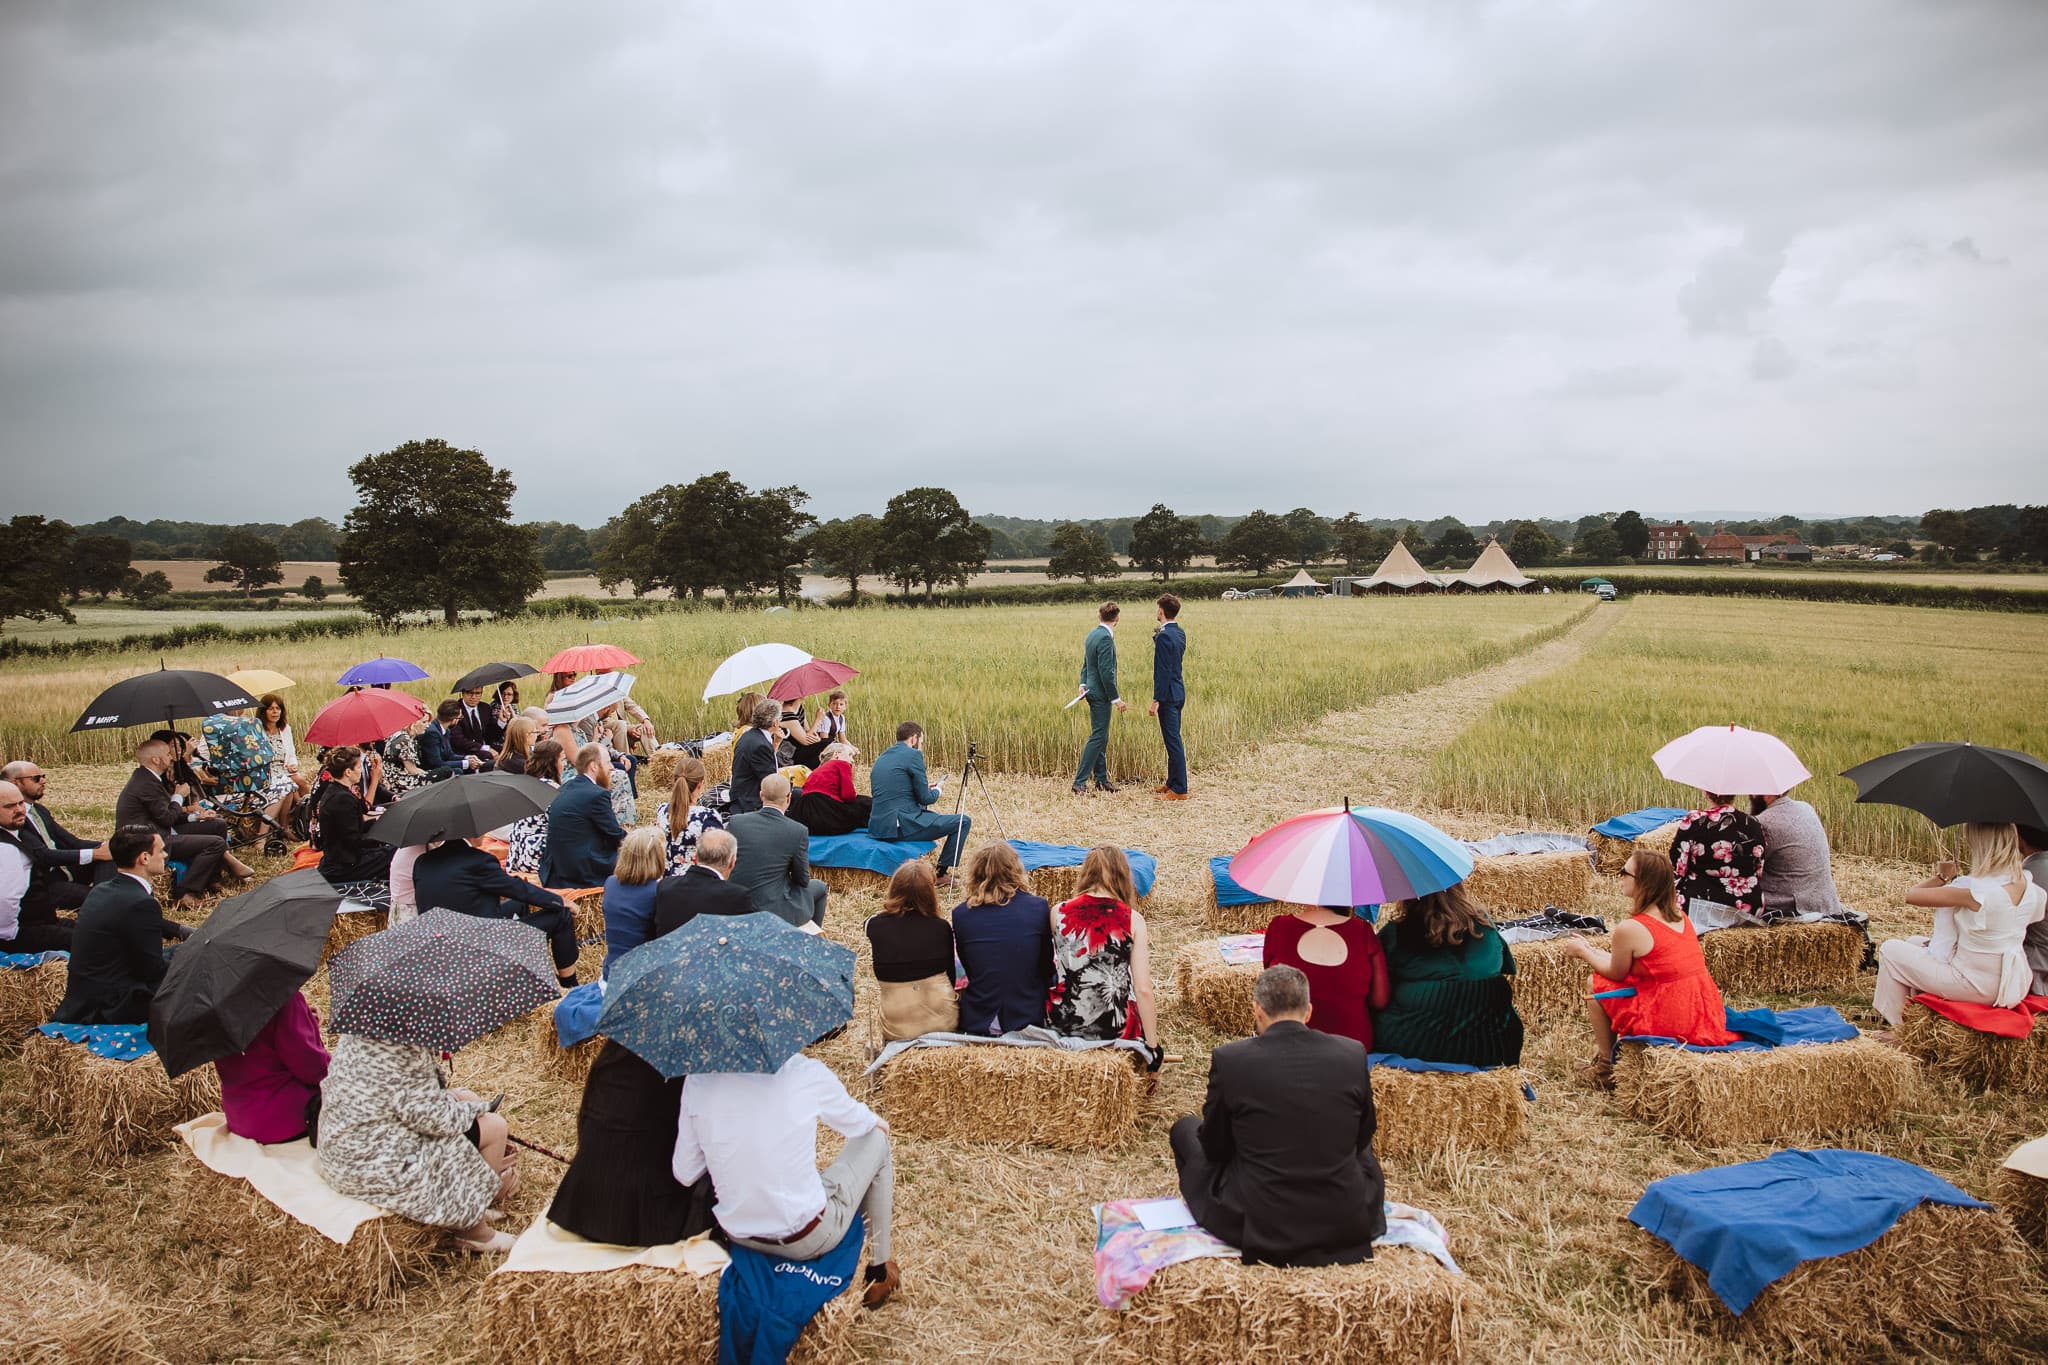 outdoor ceremony set up in a field on a rainy day